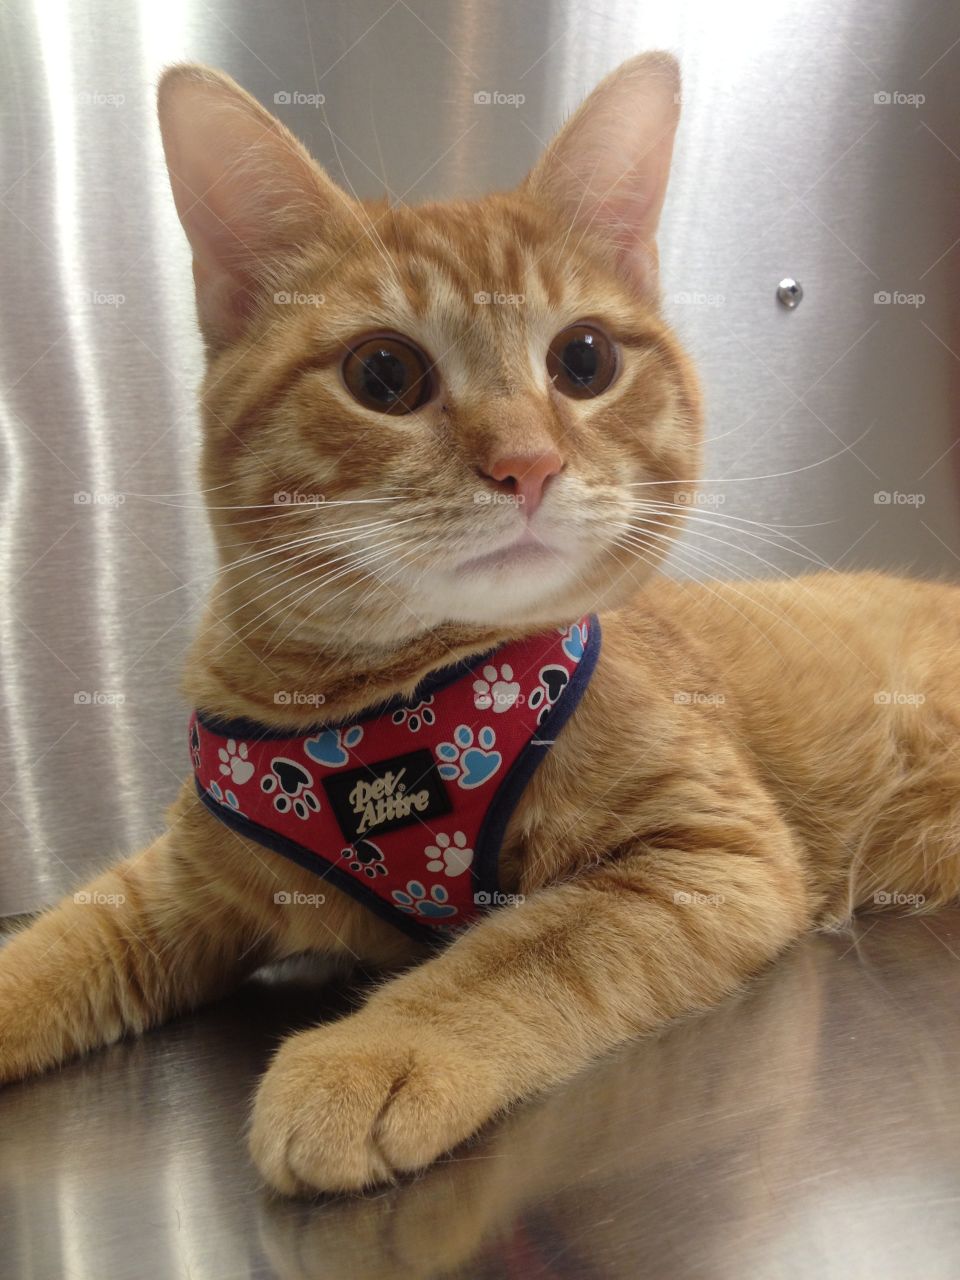 Orange Cat At Veterinary Office. Recently adopted orange shelter cat at veterinary office during yearly check up exam.